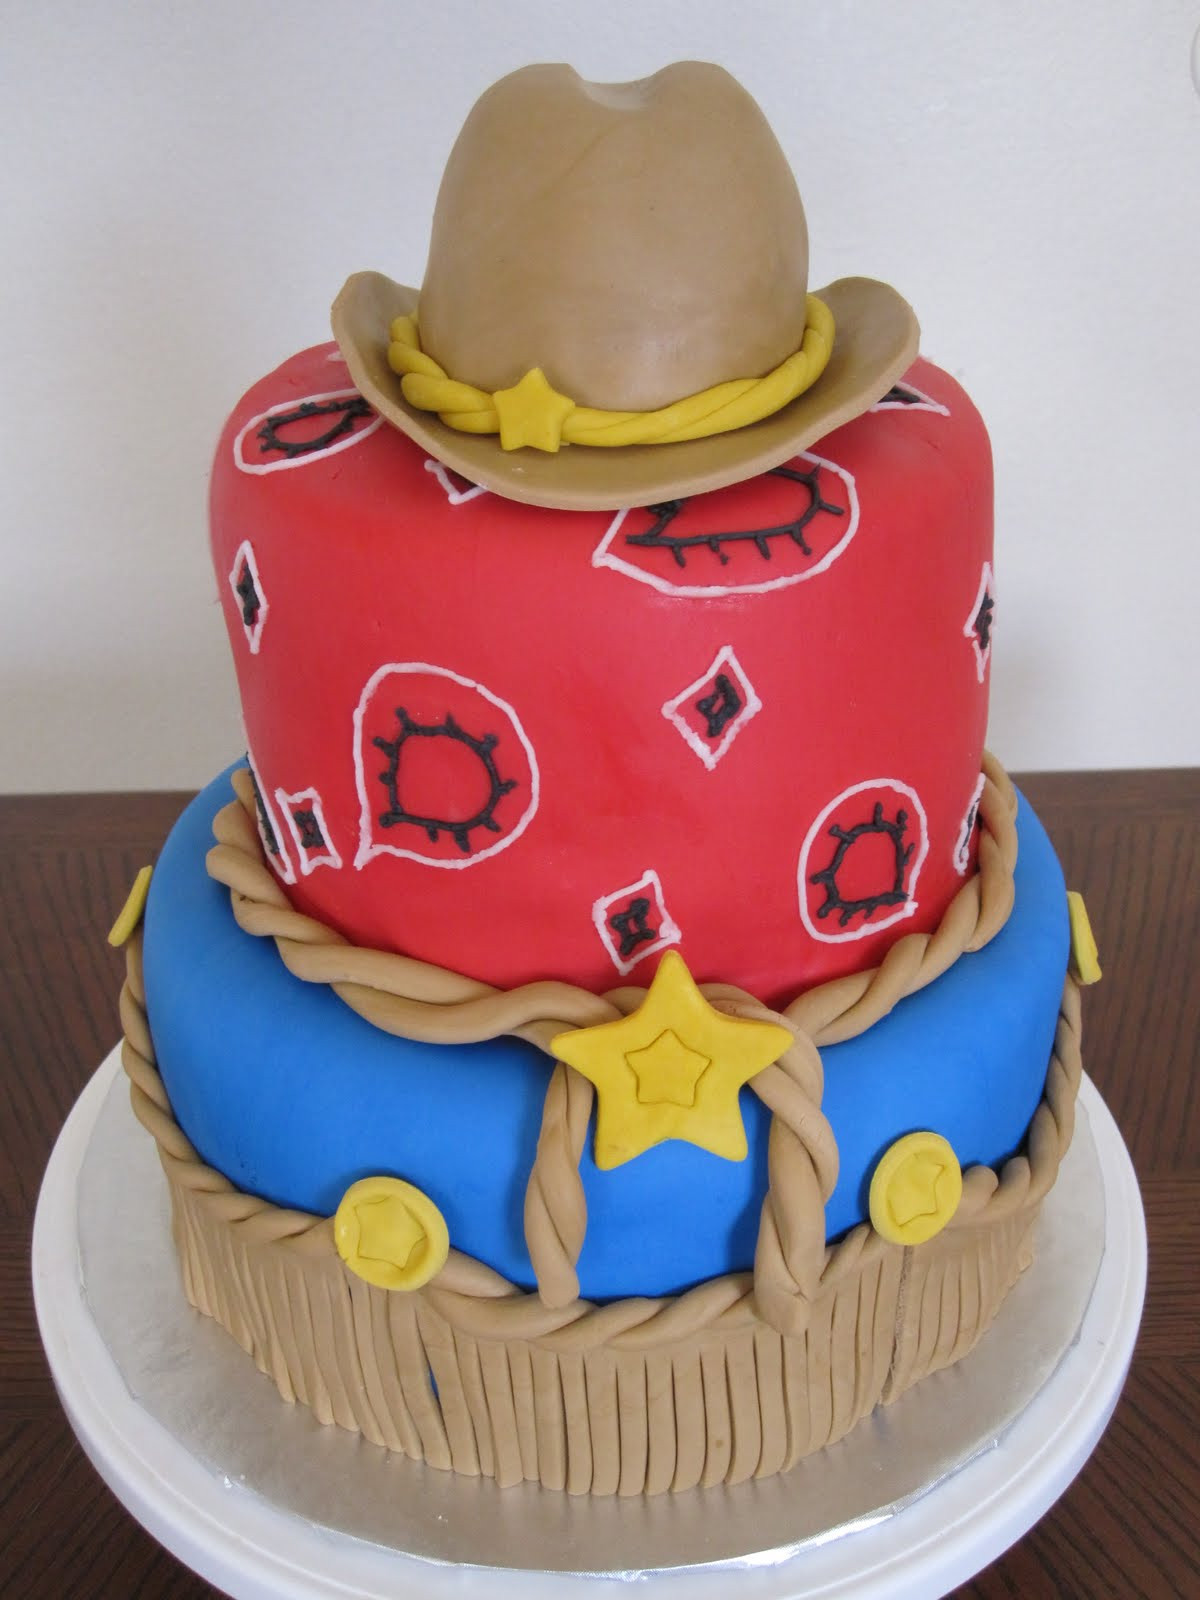 Cowgirl Birthday Cakes
 Ms Cakes Cowgirl Cake